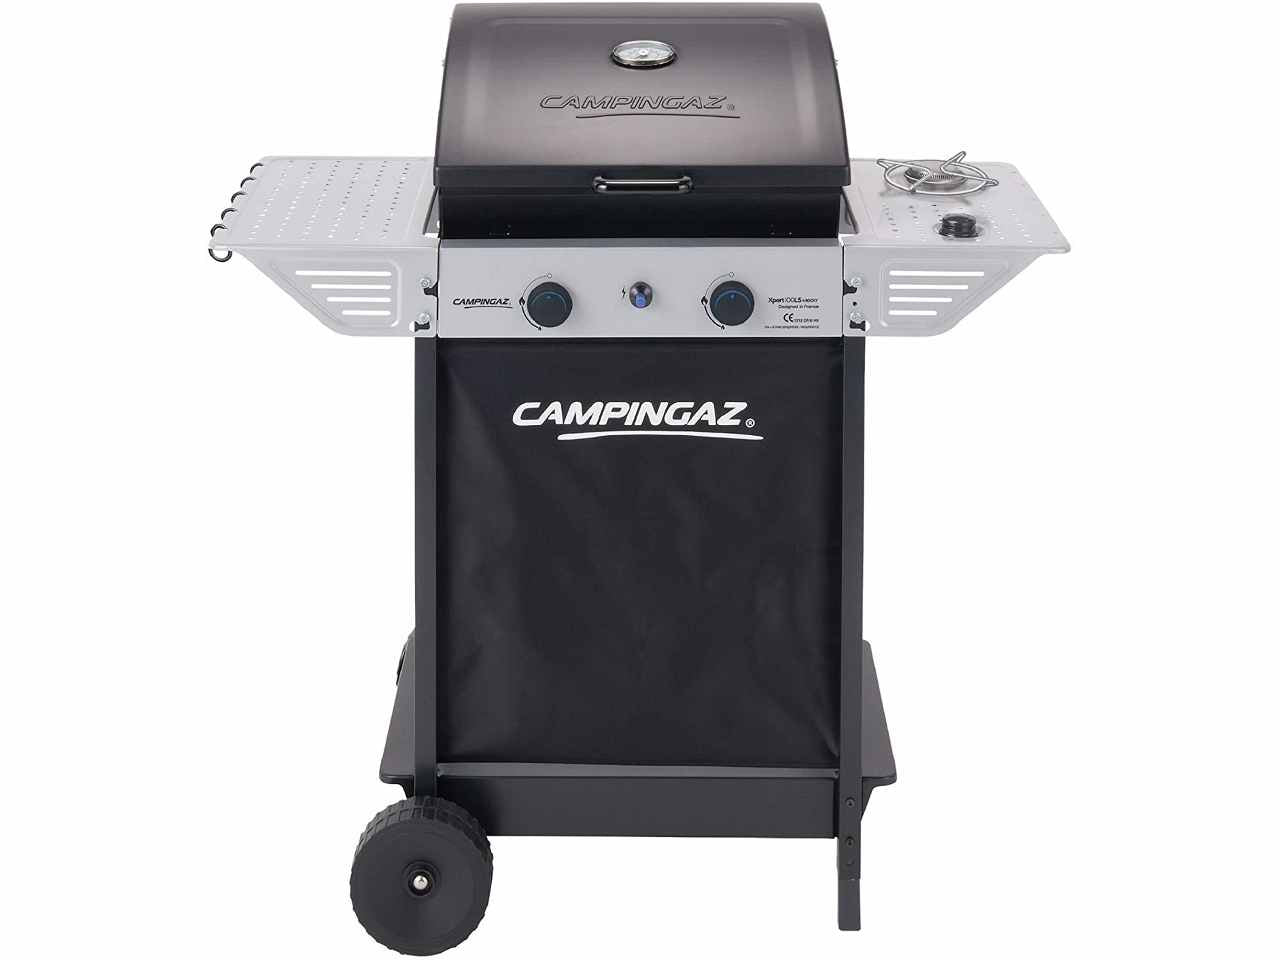 Barbecue xpert 100 ls+ rocky 3000004828